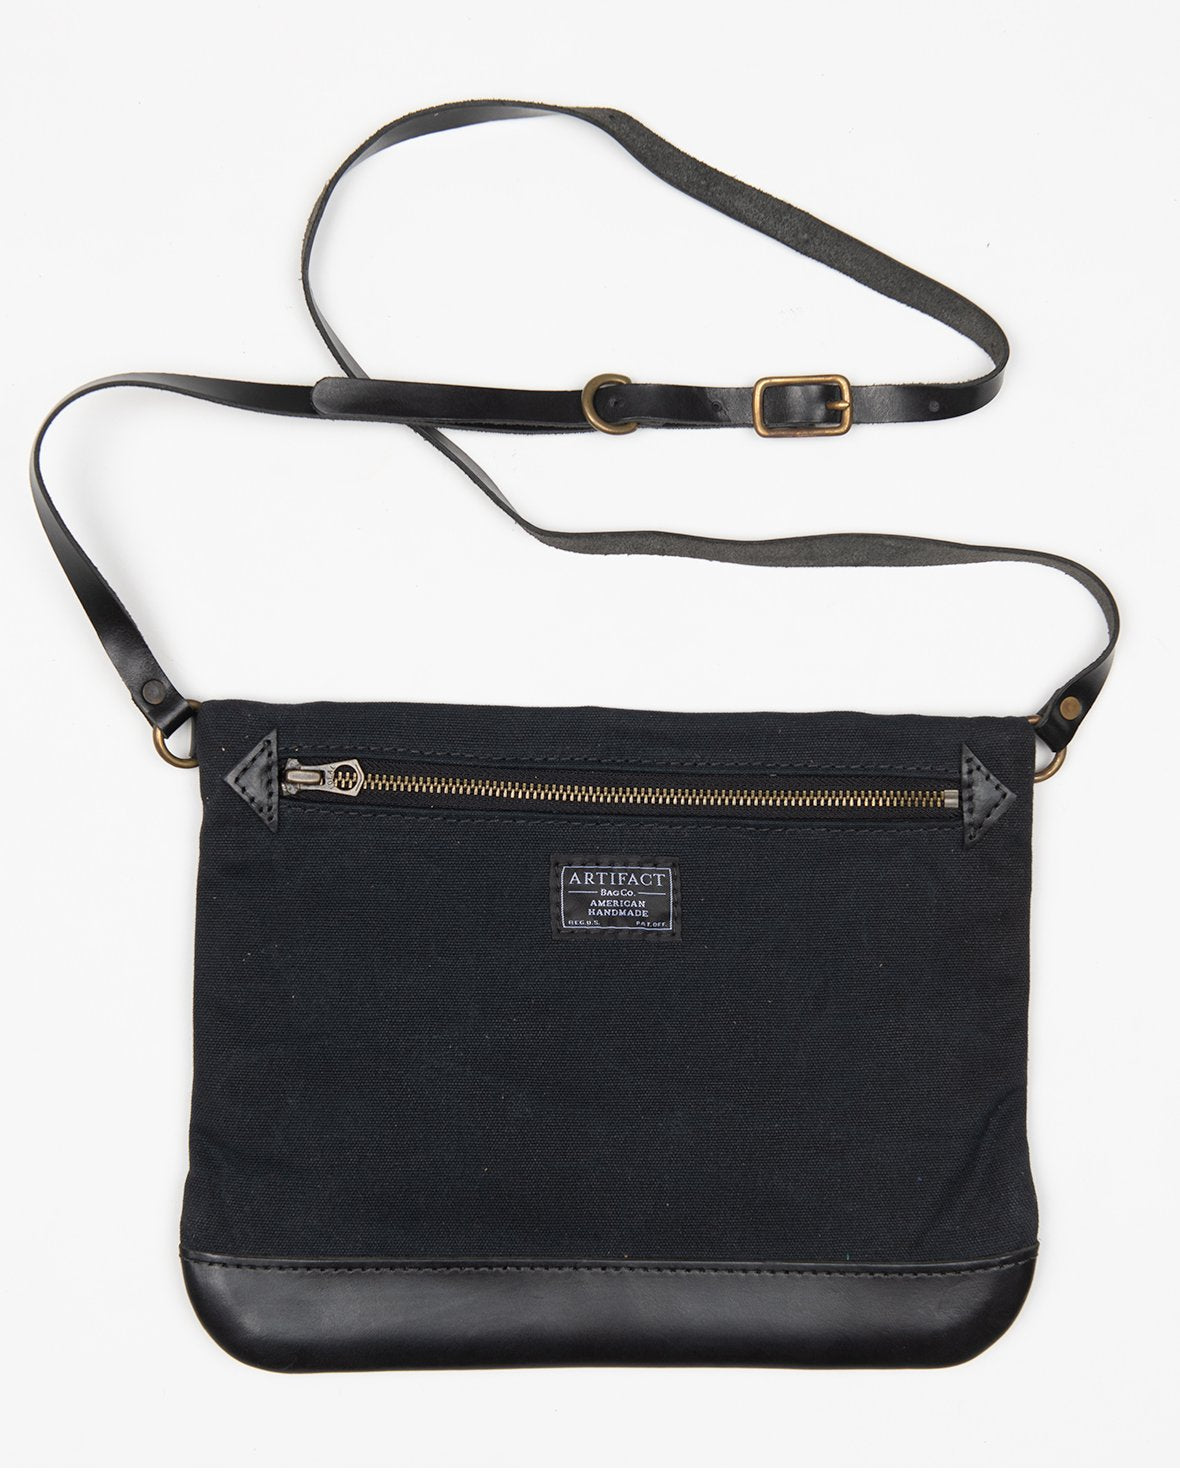 Small Crossbody Bag in Pacific Blue Wax Canvas & Leather | Artifact | Made in USA Black Wax